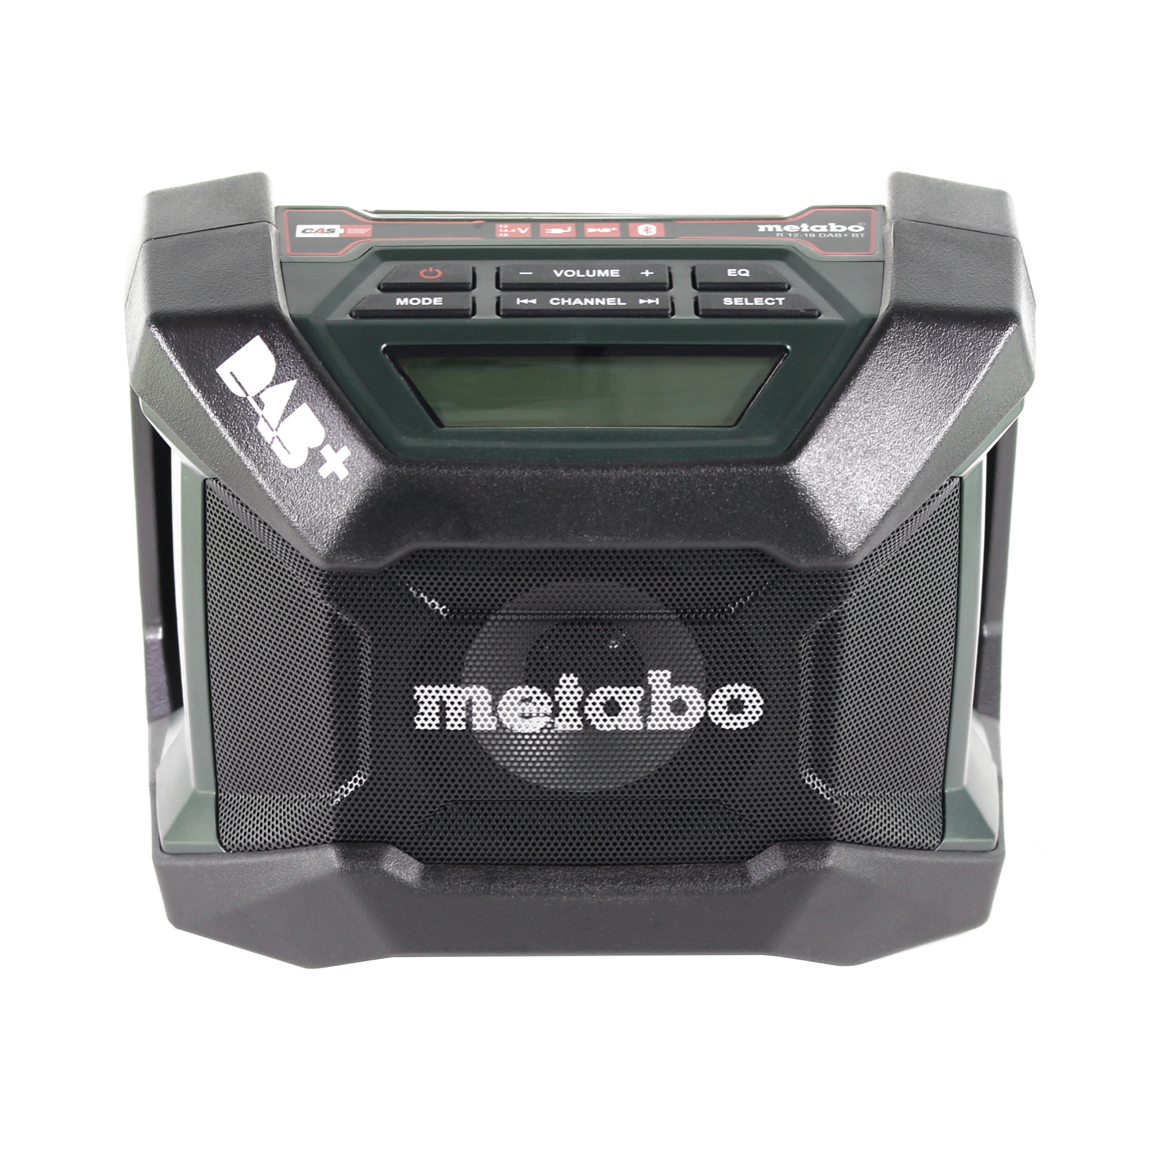 Radio chargeur r 12-18 dab bt pick+mix metabo (sans batterie ni chargeur) - 600778850 1